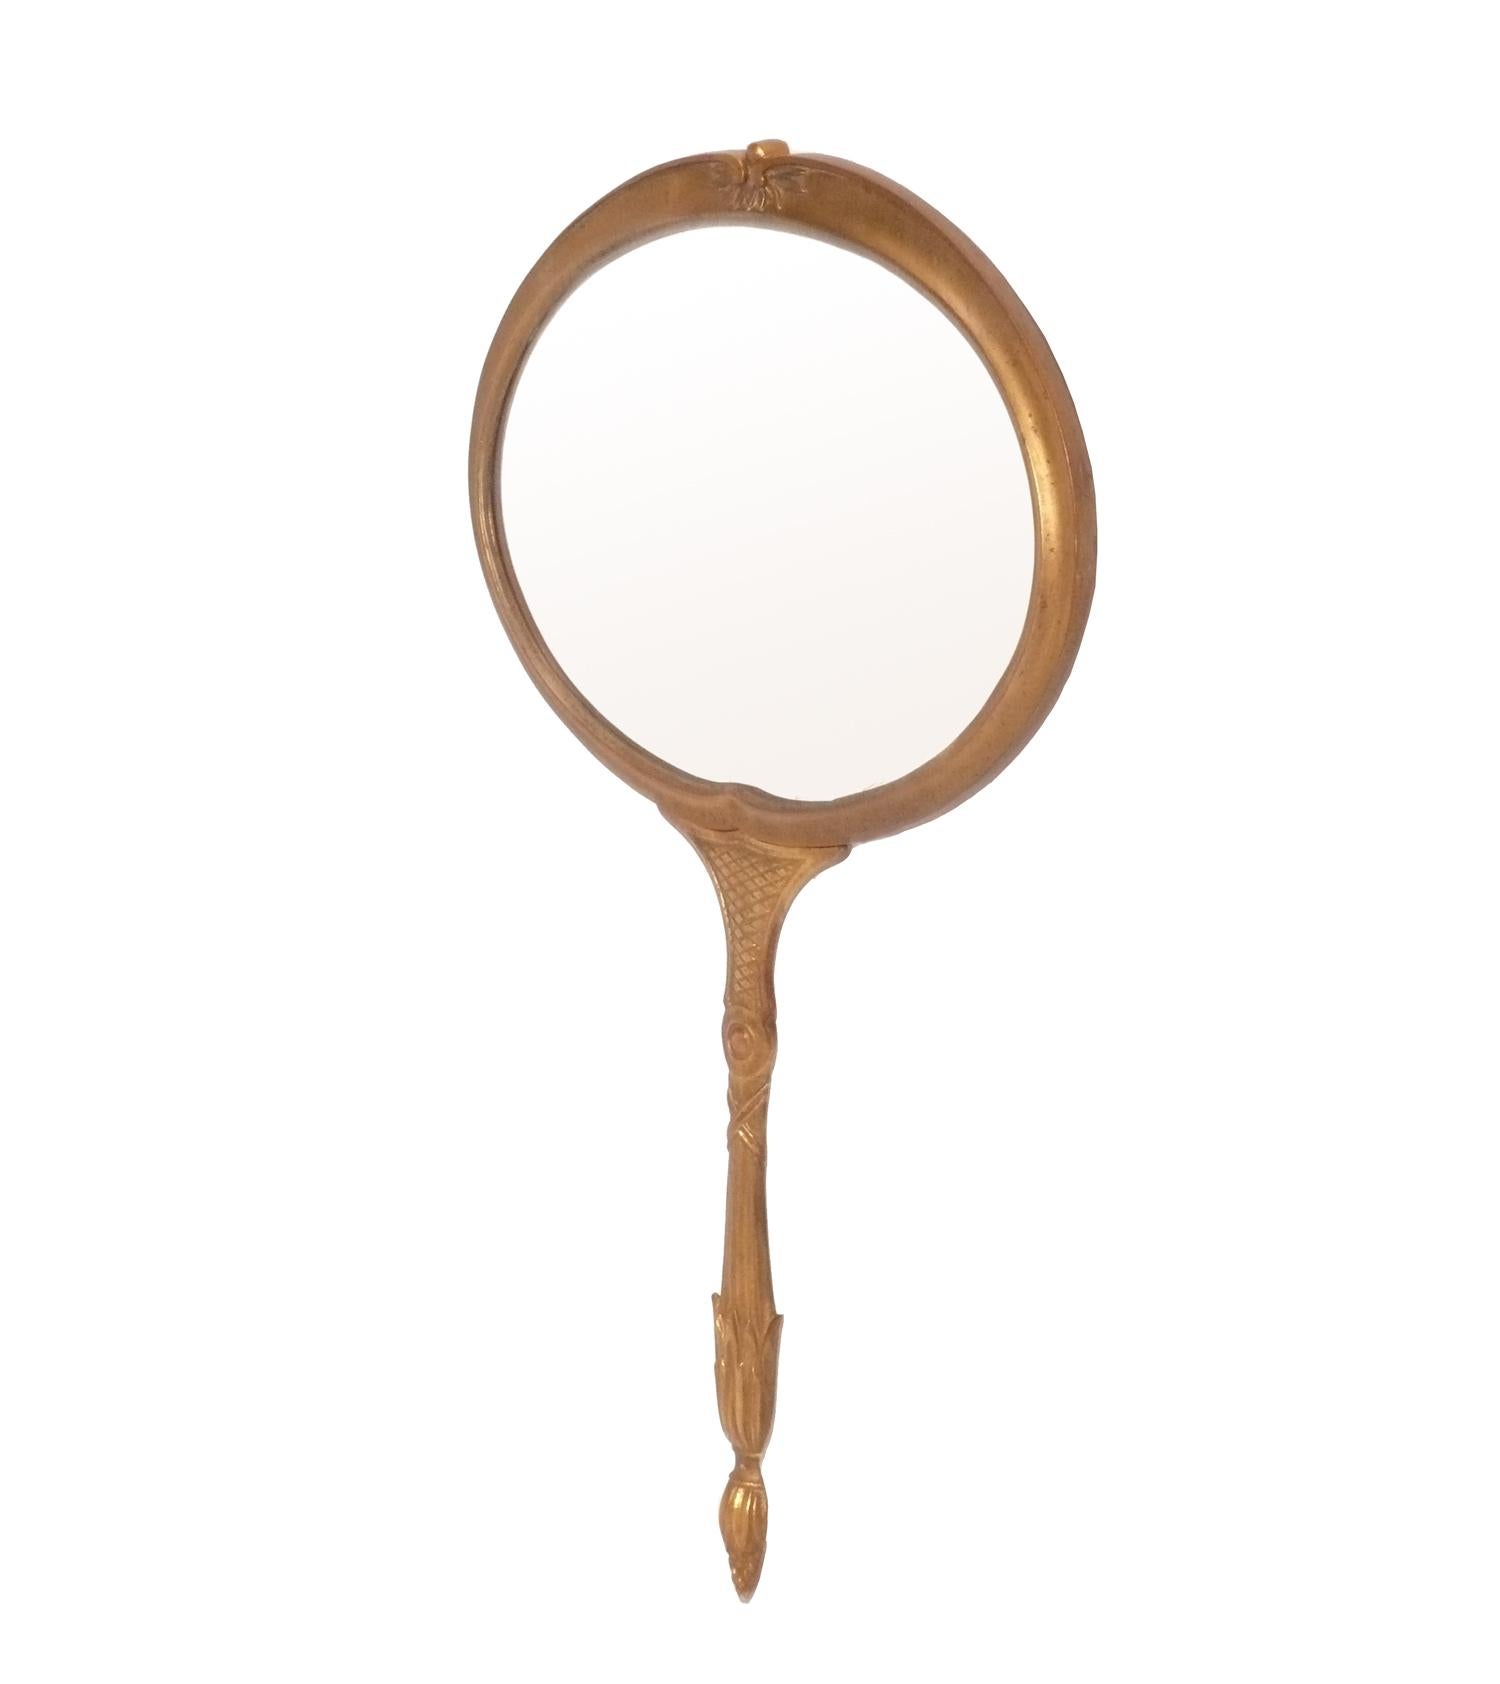 Hand Mirror Shaped Wall Mirror in Gilt Metal, by Palladio, Italian, circa 1960s. Signed on back.